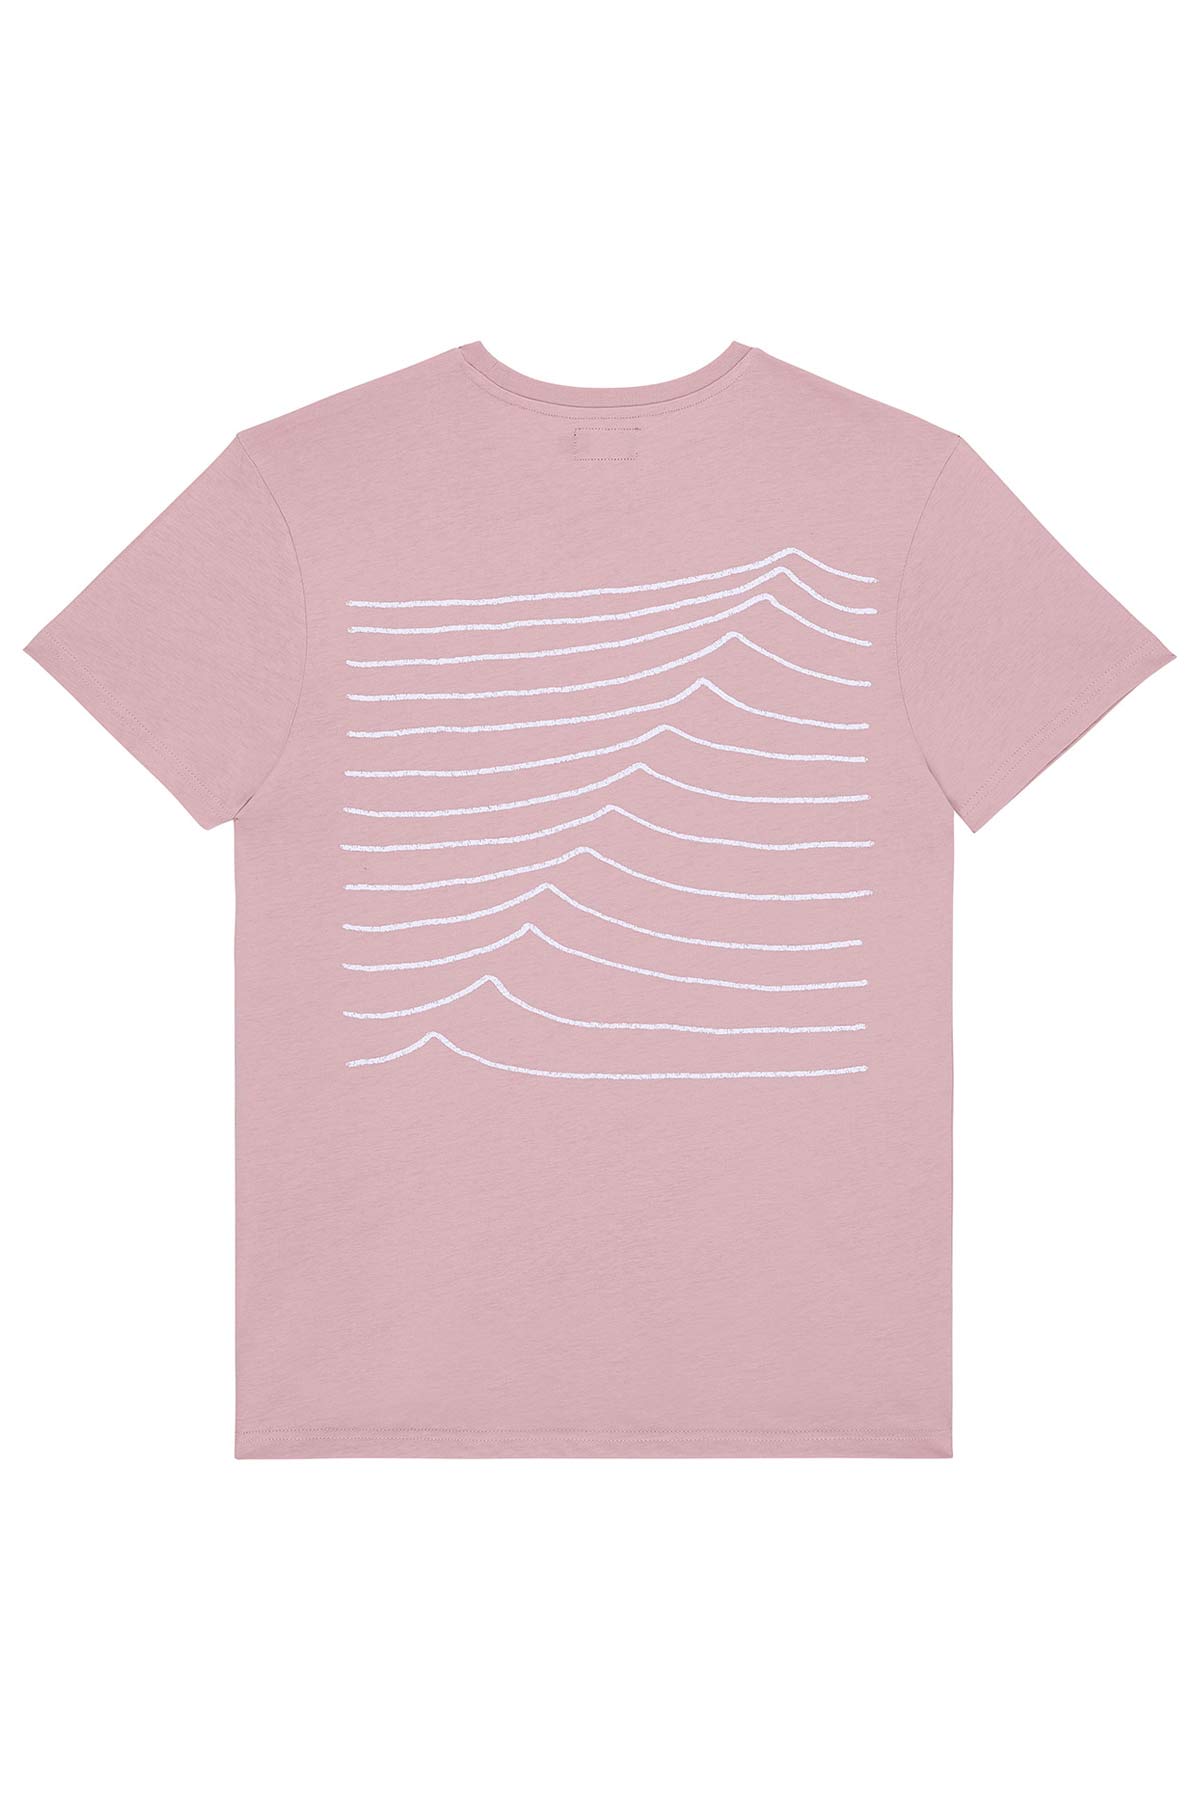 T-shirt Swell - Bask in the sun